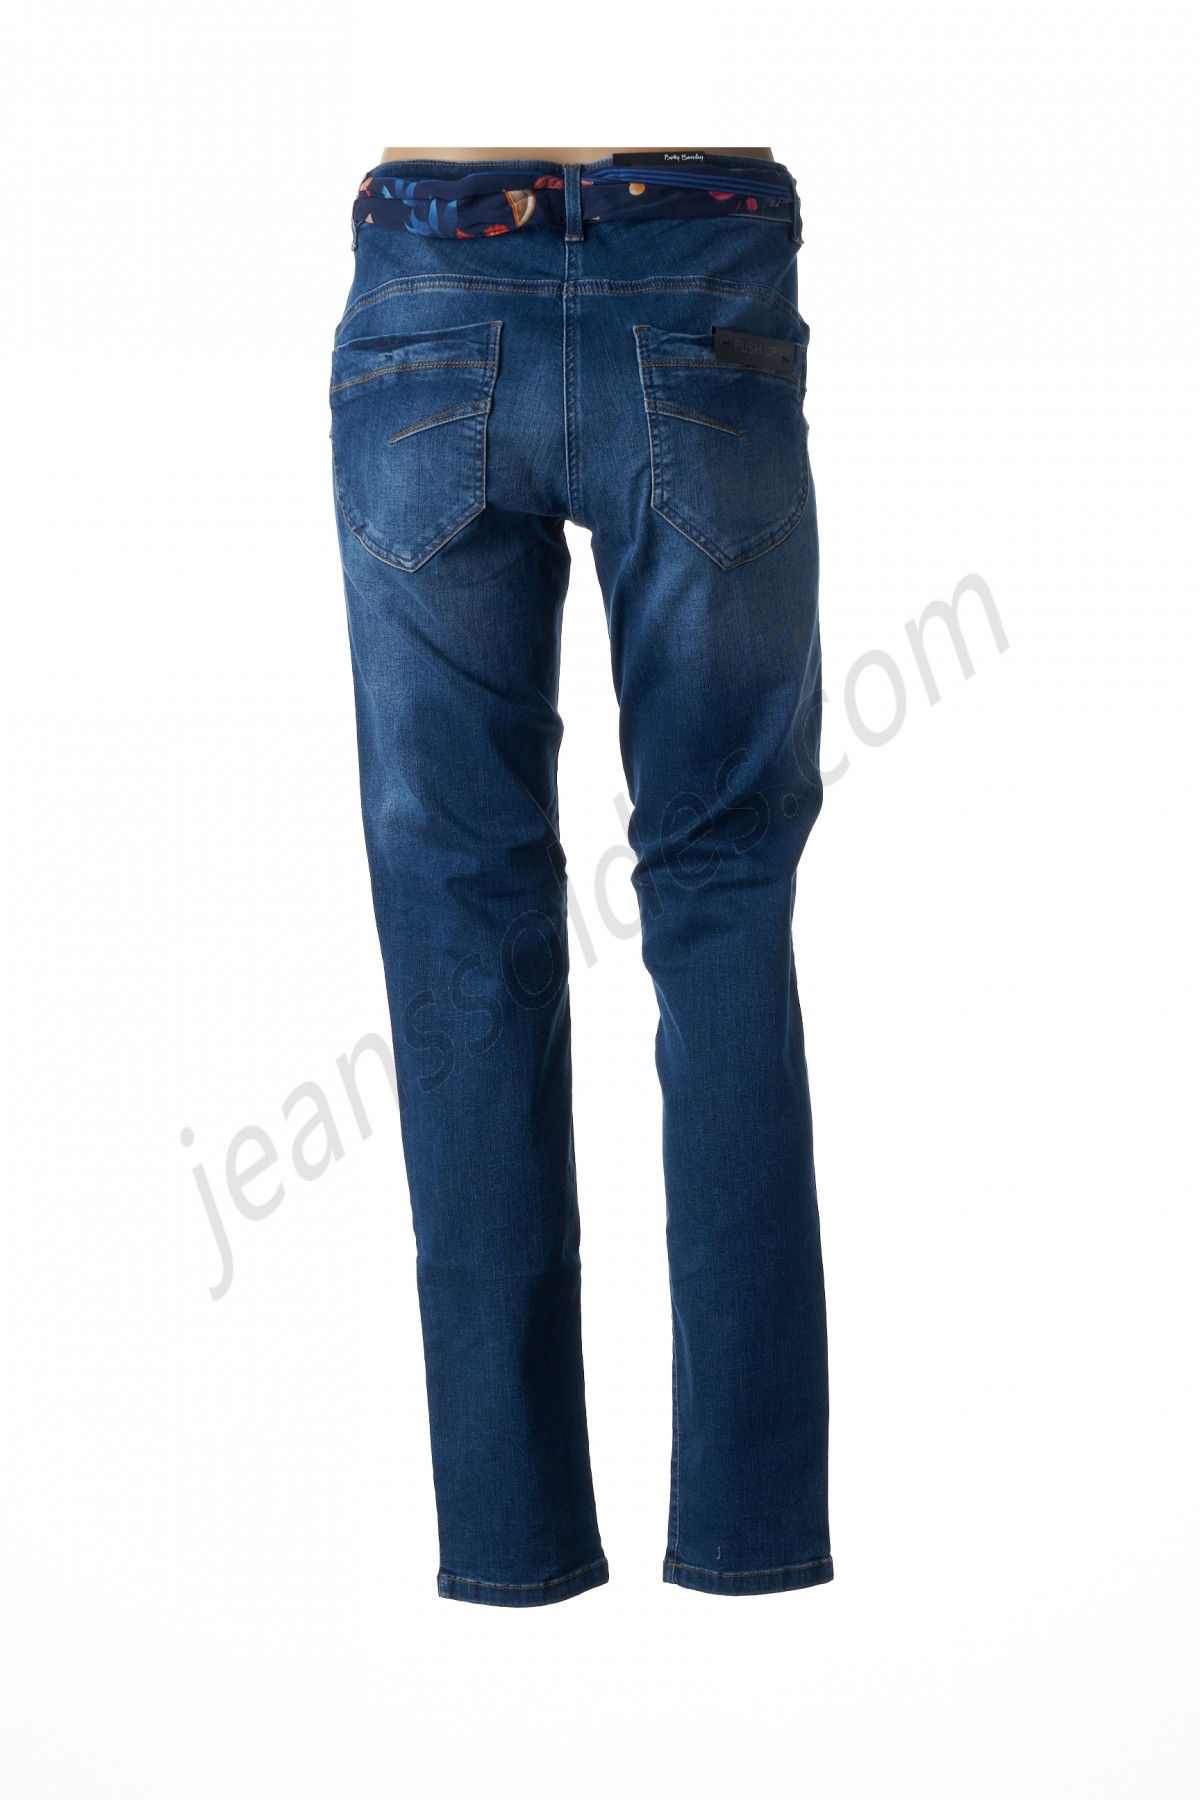 betty barclay-Jeans coupe slim prix d’amis - -1